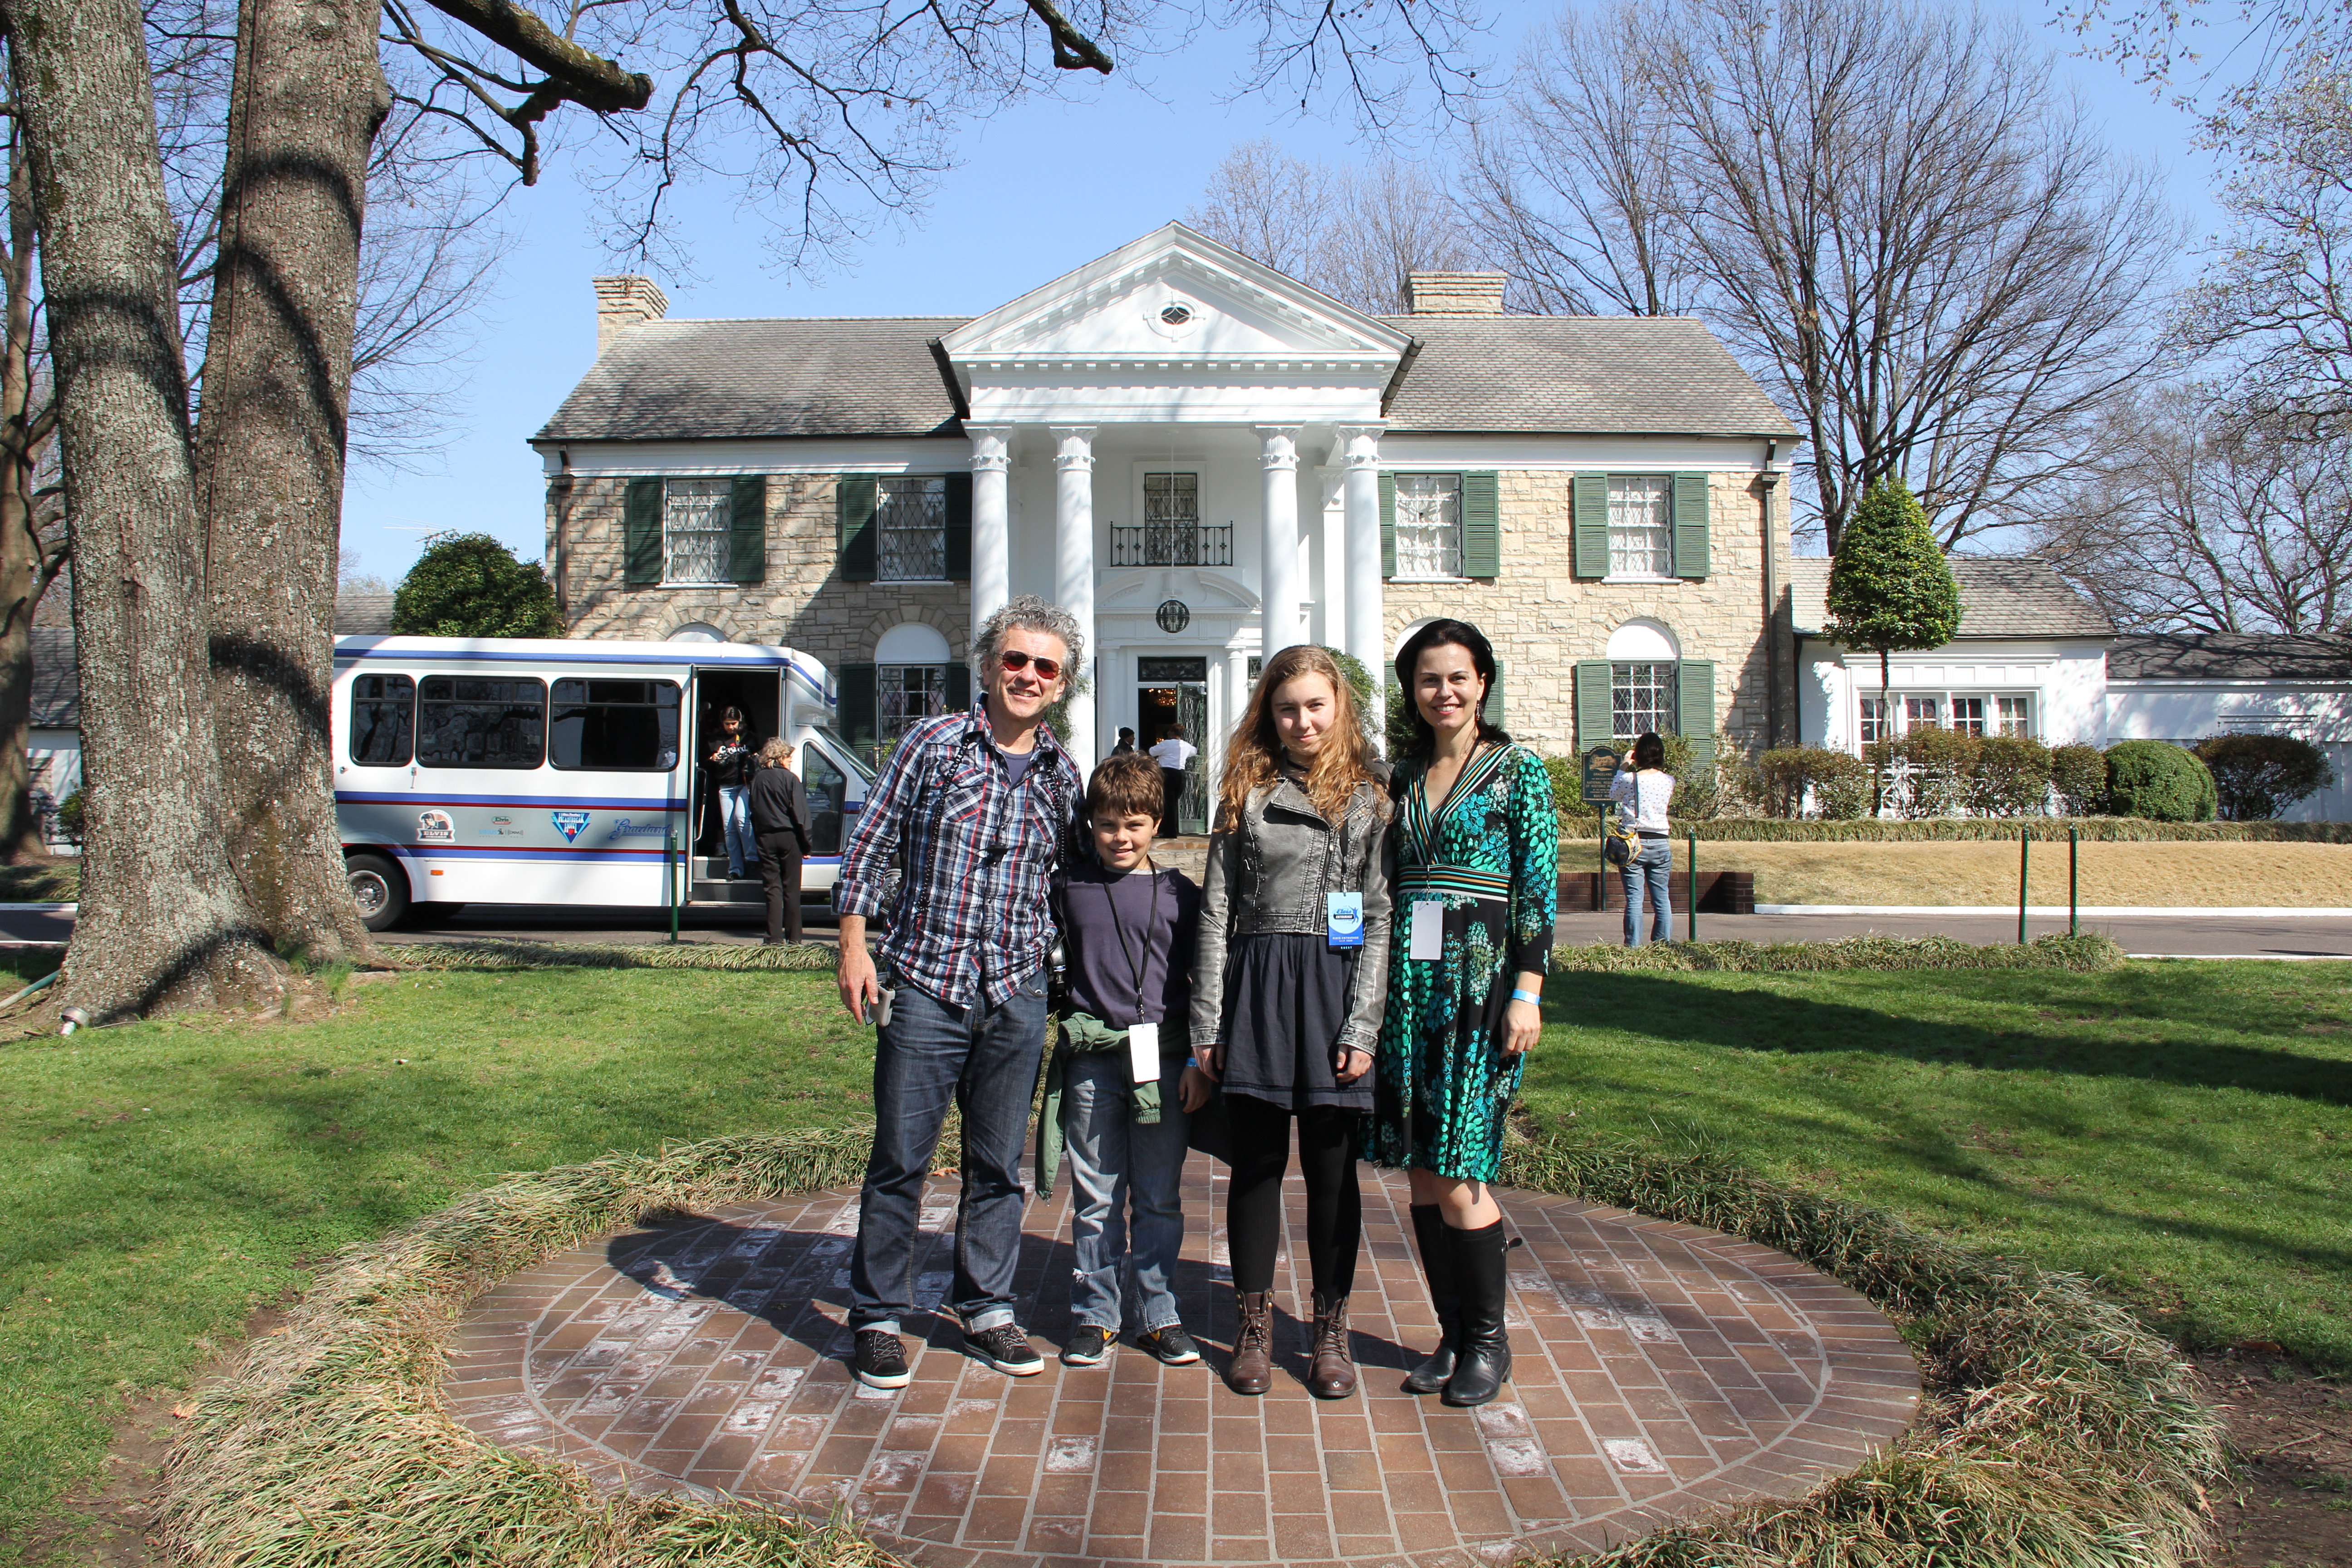 TV director Ian Stevenson, pictured with his family, on location at Graceland, Memphis, Tennessee for 'CMT's Next Superstar'. More at ianstevenson.tv